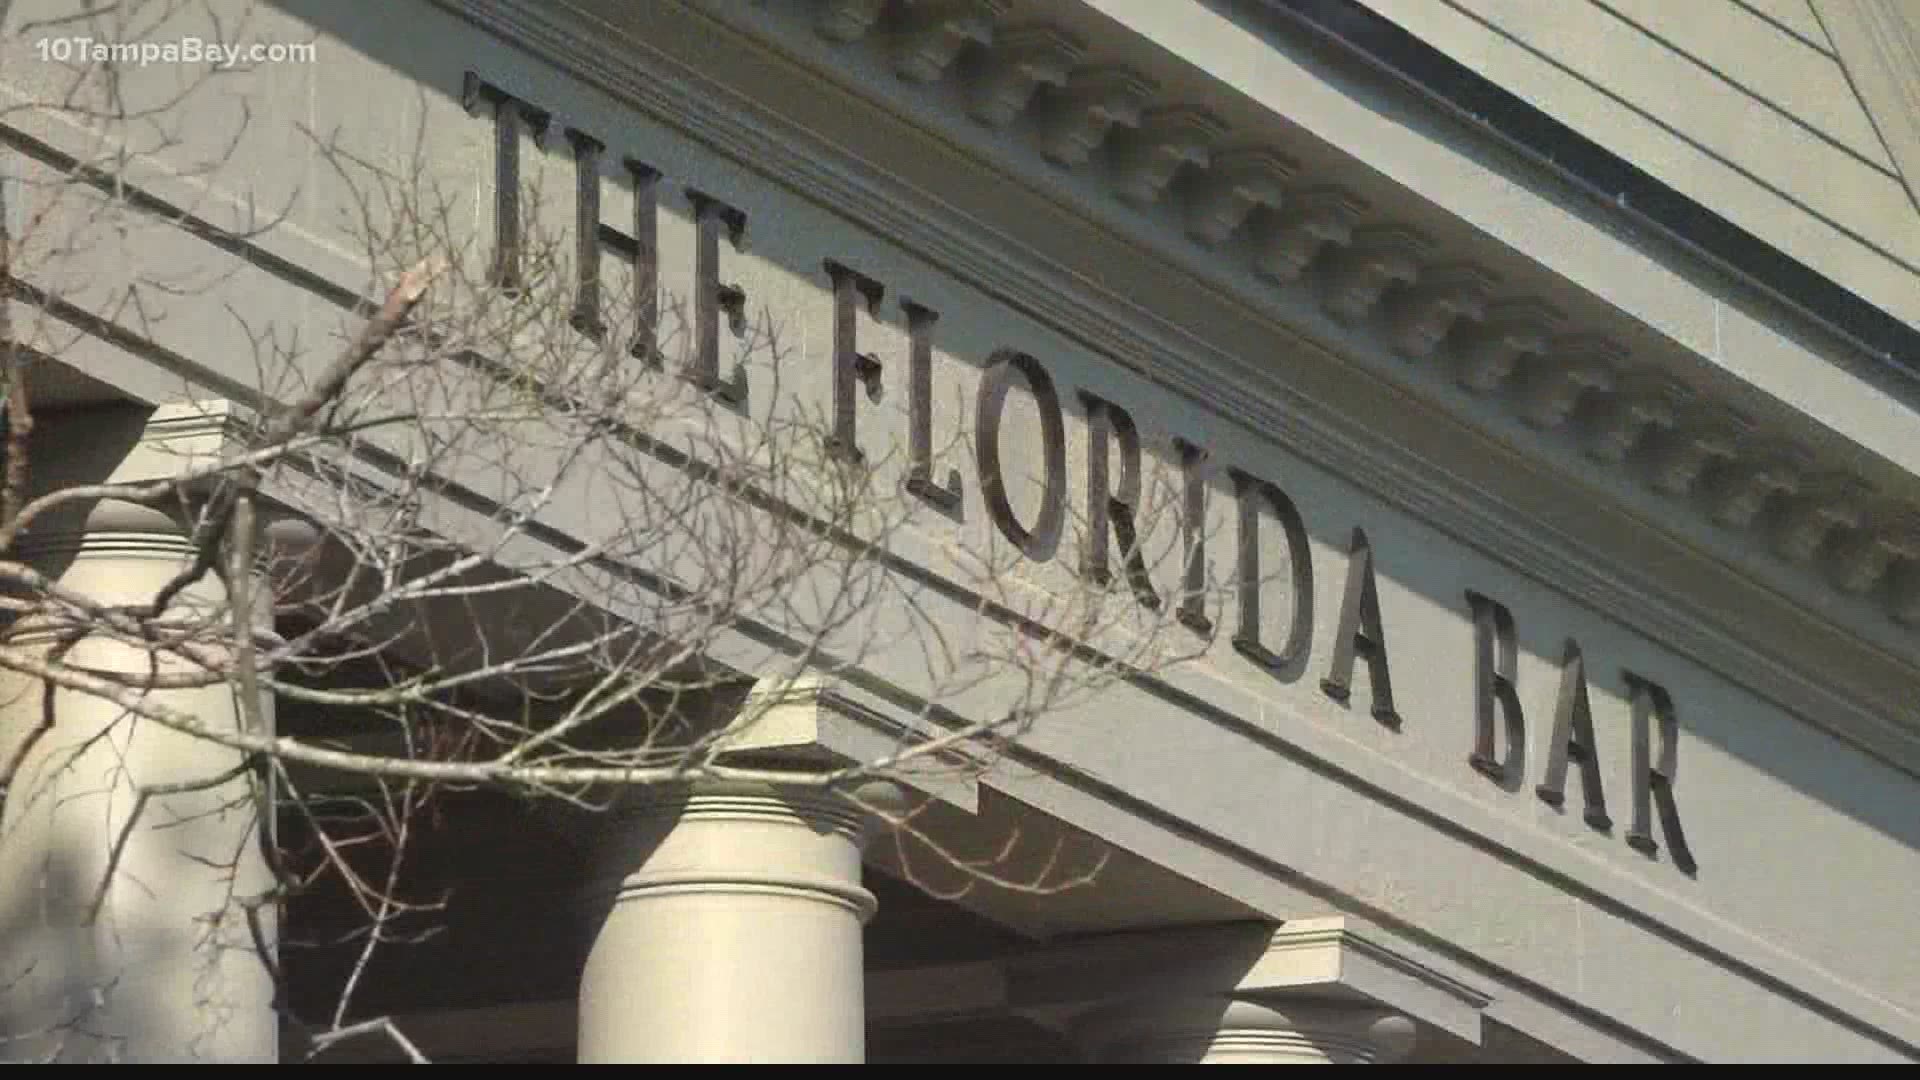 More than 3,000 Florida Bar exam registrants must now wait another two months to take the exam they must pass to practice law in the state.